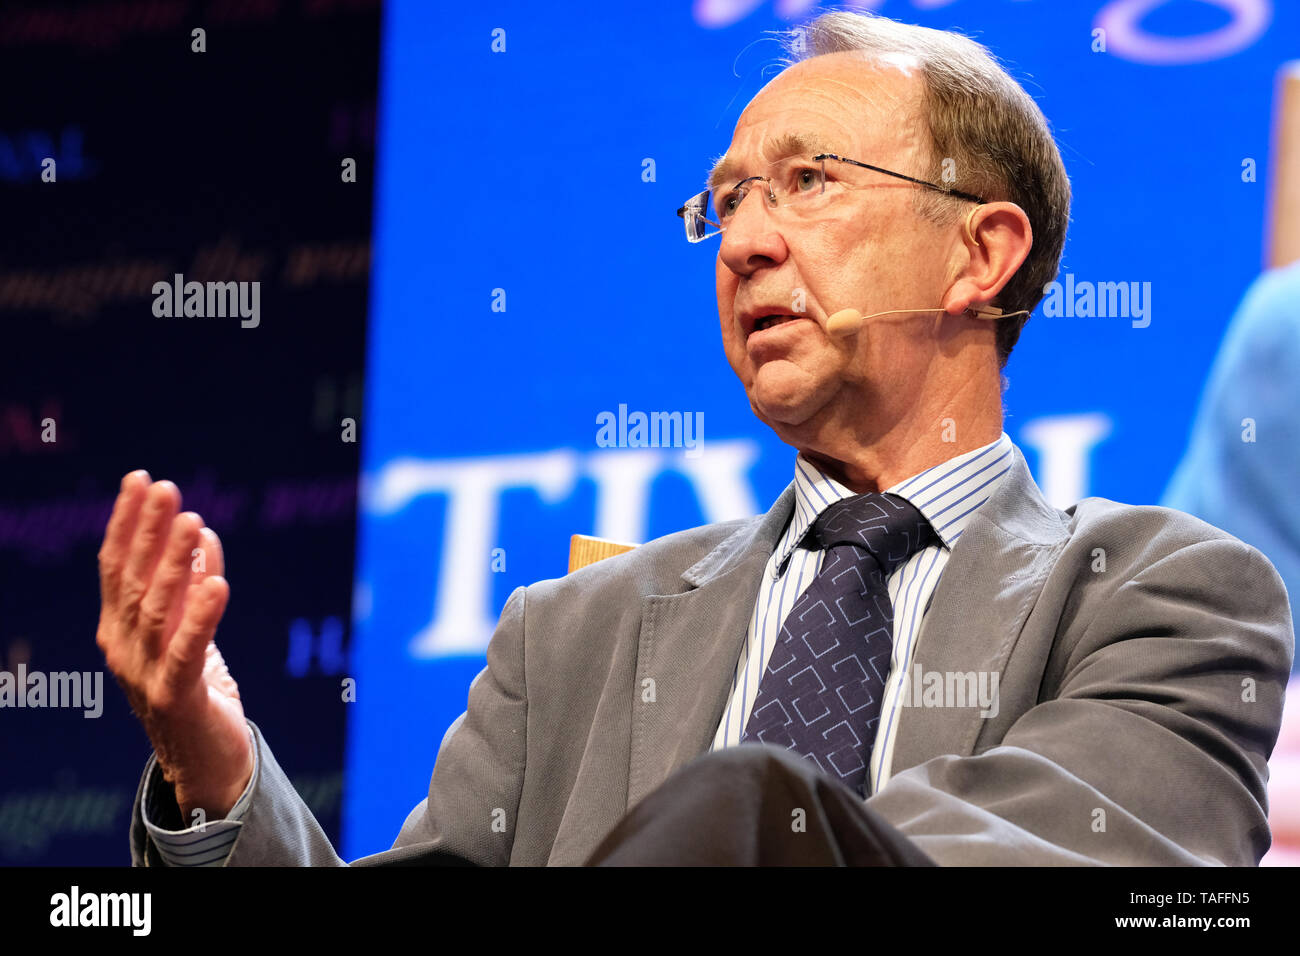 Ian Kershaw High Resolution Stock Photography and Images - Alamy